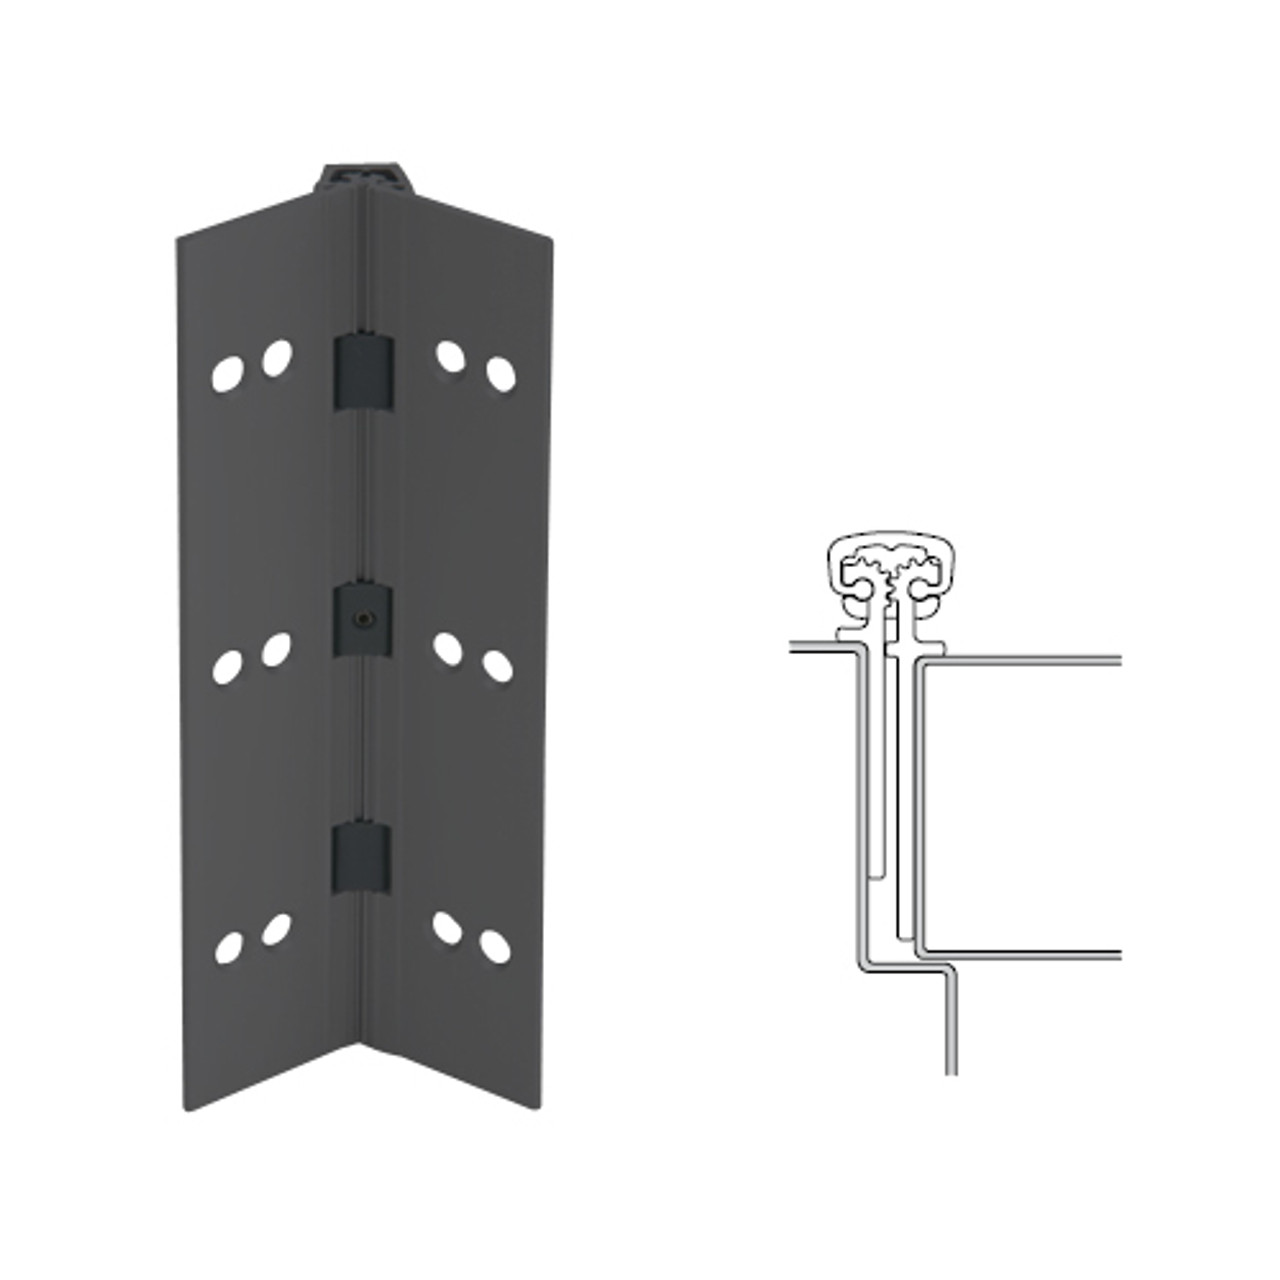 026XY-315AN-83-TF IVES Full Mortise Continuous Geared Hinges with Thread Forming Screws in Anodized Black